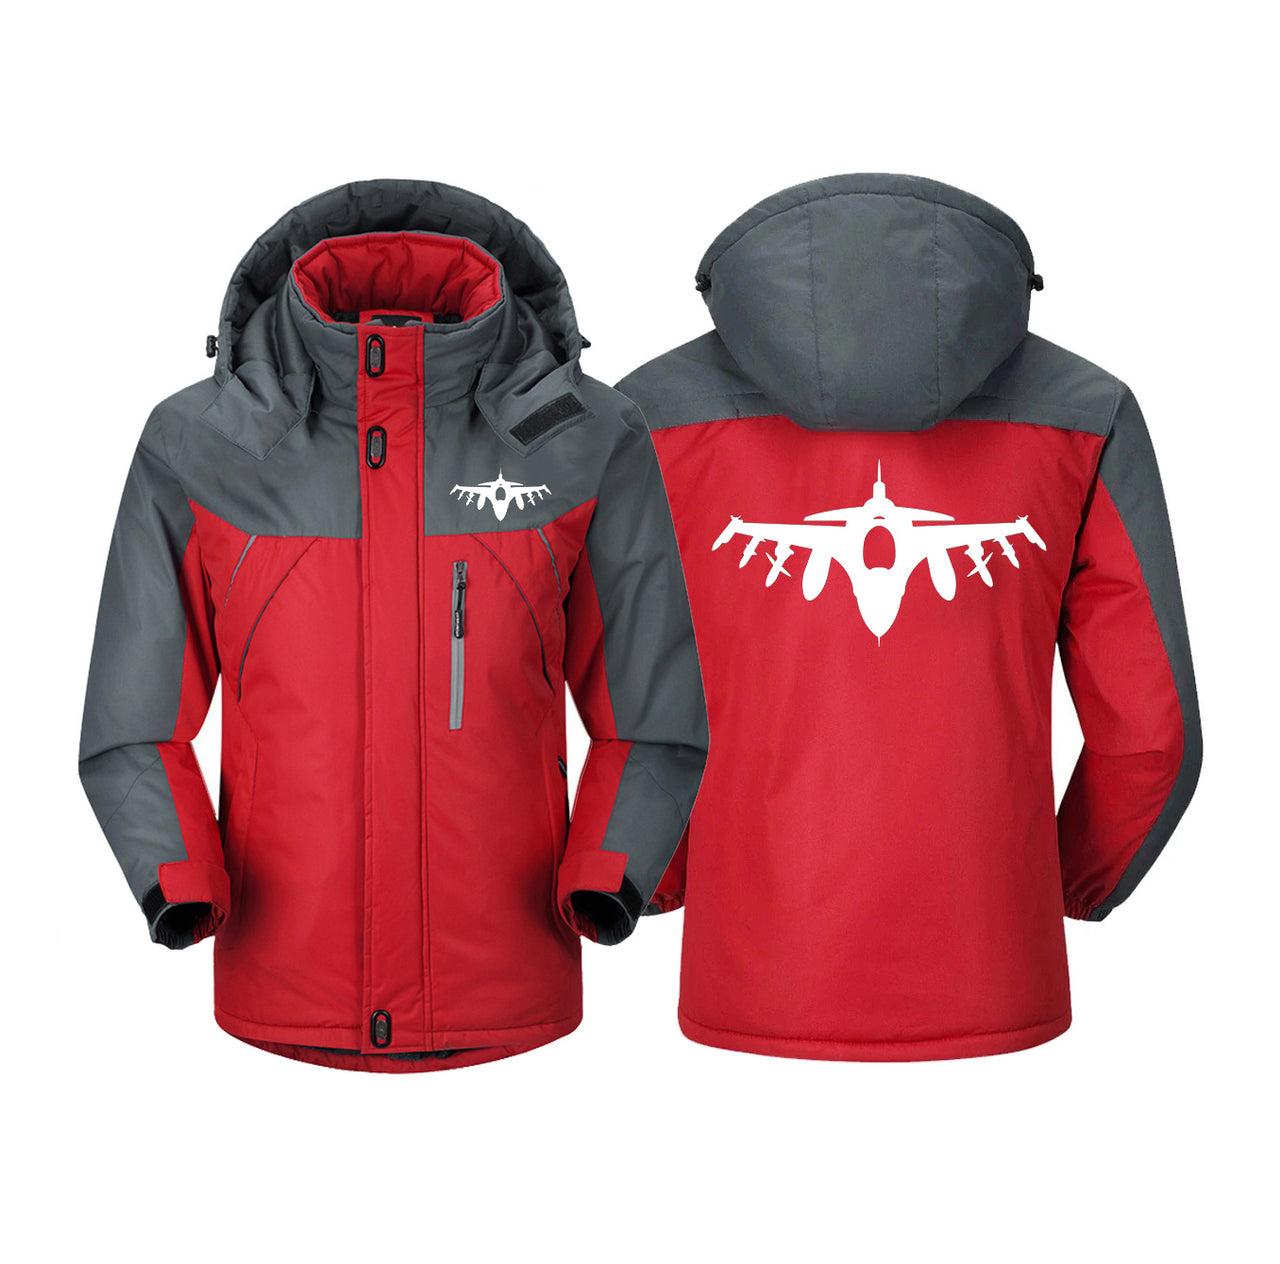 Fighting Falcon F16 Silhouette Designed Thick Winter Jackets